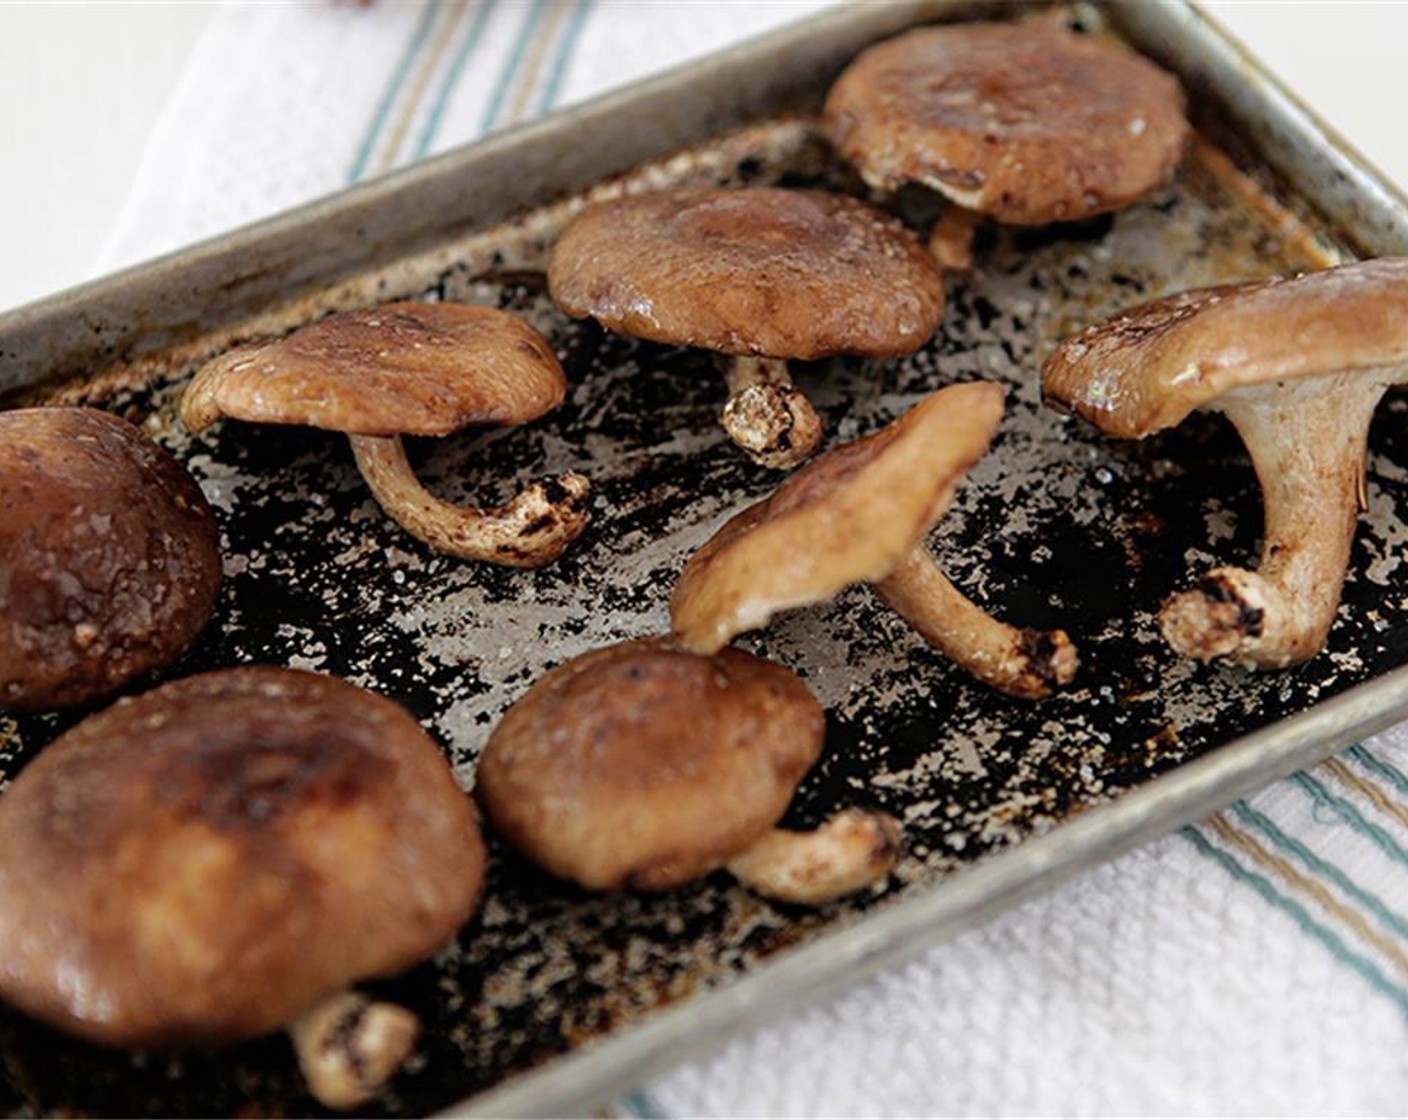 step 4 Mix and put on a small roasting pan, reserve bowl for later use. Cook in the oven for 10-11 min, remove from oven, place mushrooms and the liquid from the mushrooms cooking in a small bowl and allow to cool. Turn oven down to 325 degrees F (160 degrees C).